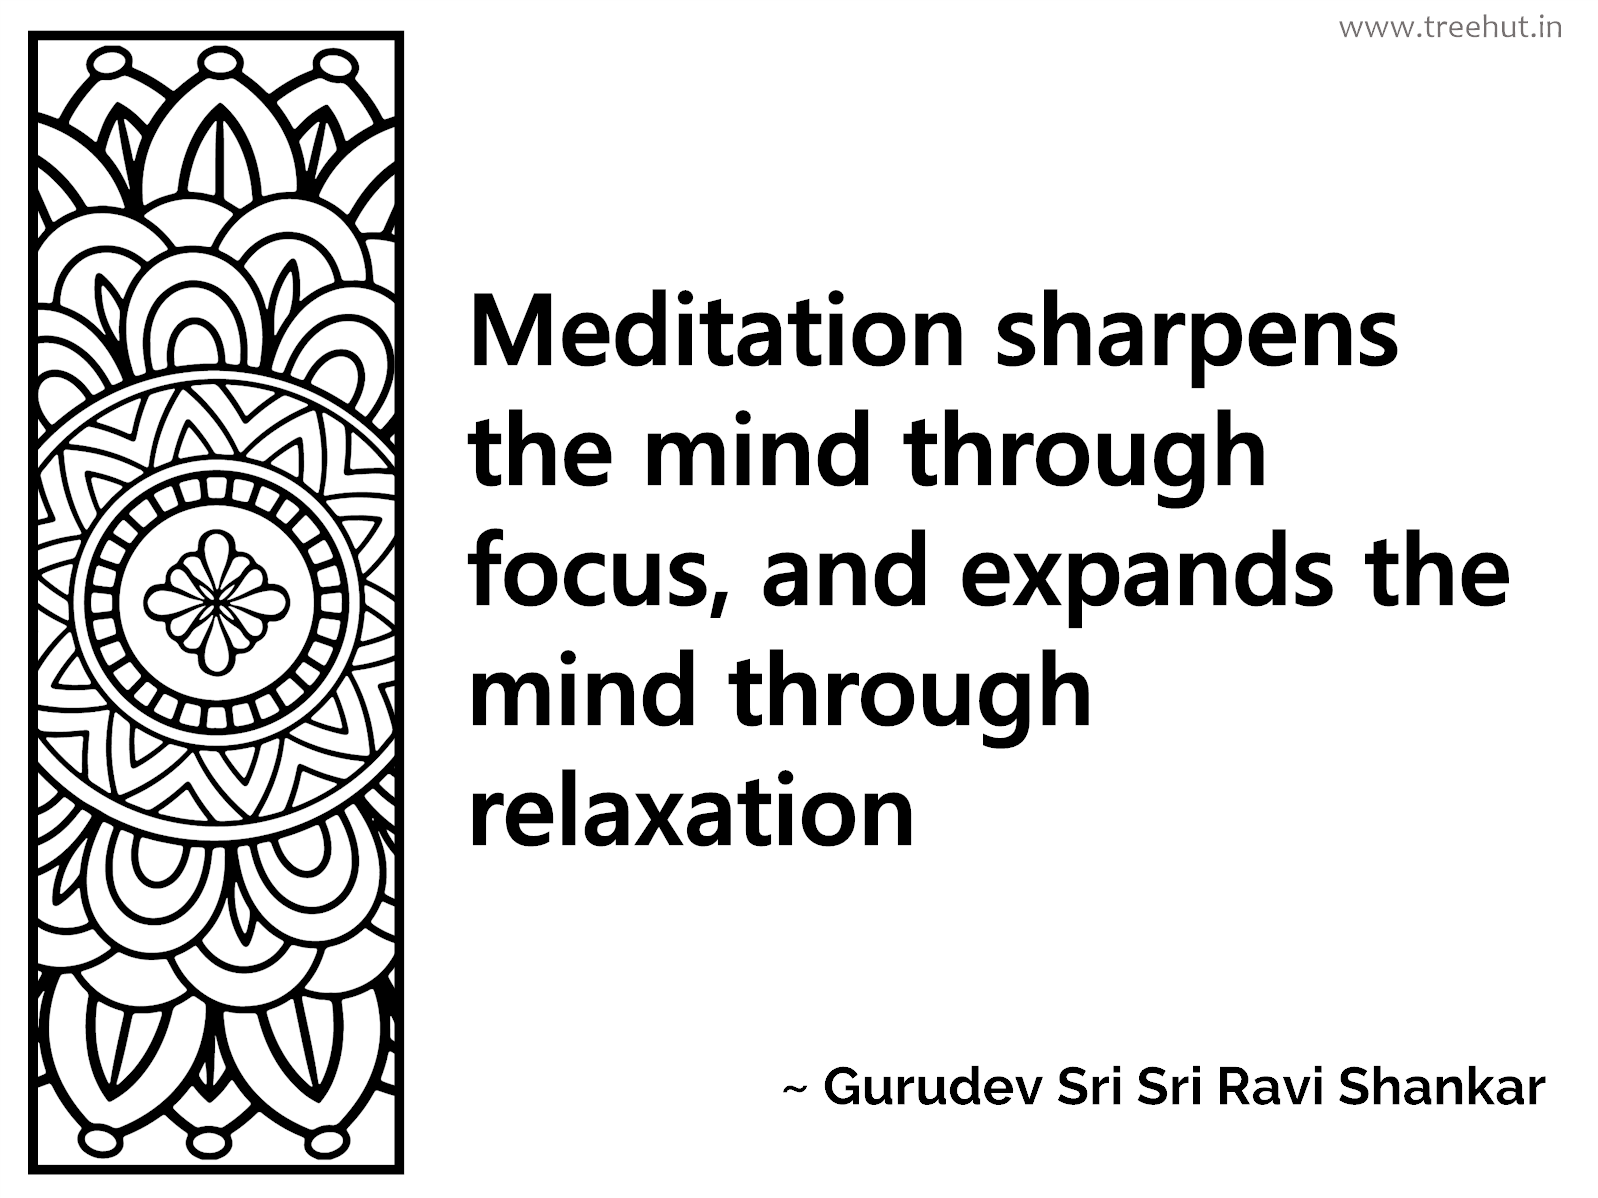 Meditation sharpens the mind through focus, and expands the mind through relaxation Inspirational Quote by Gurudev Sri Sri Ravi Shankar, coloring pages